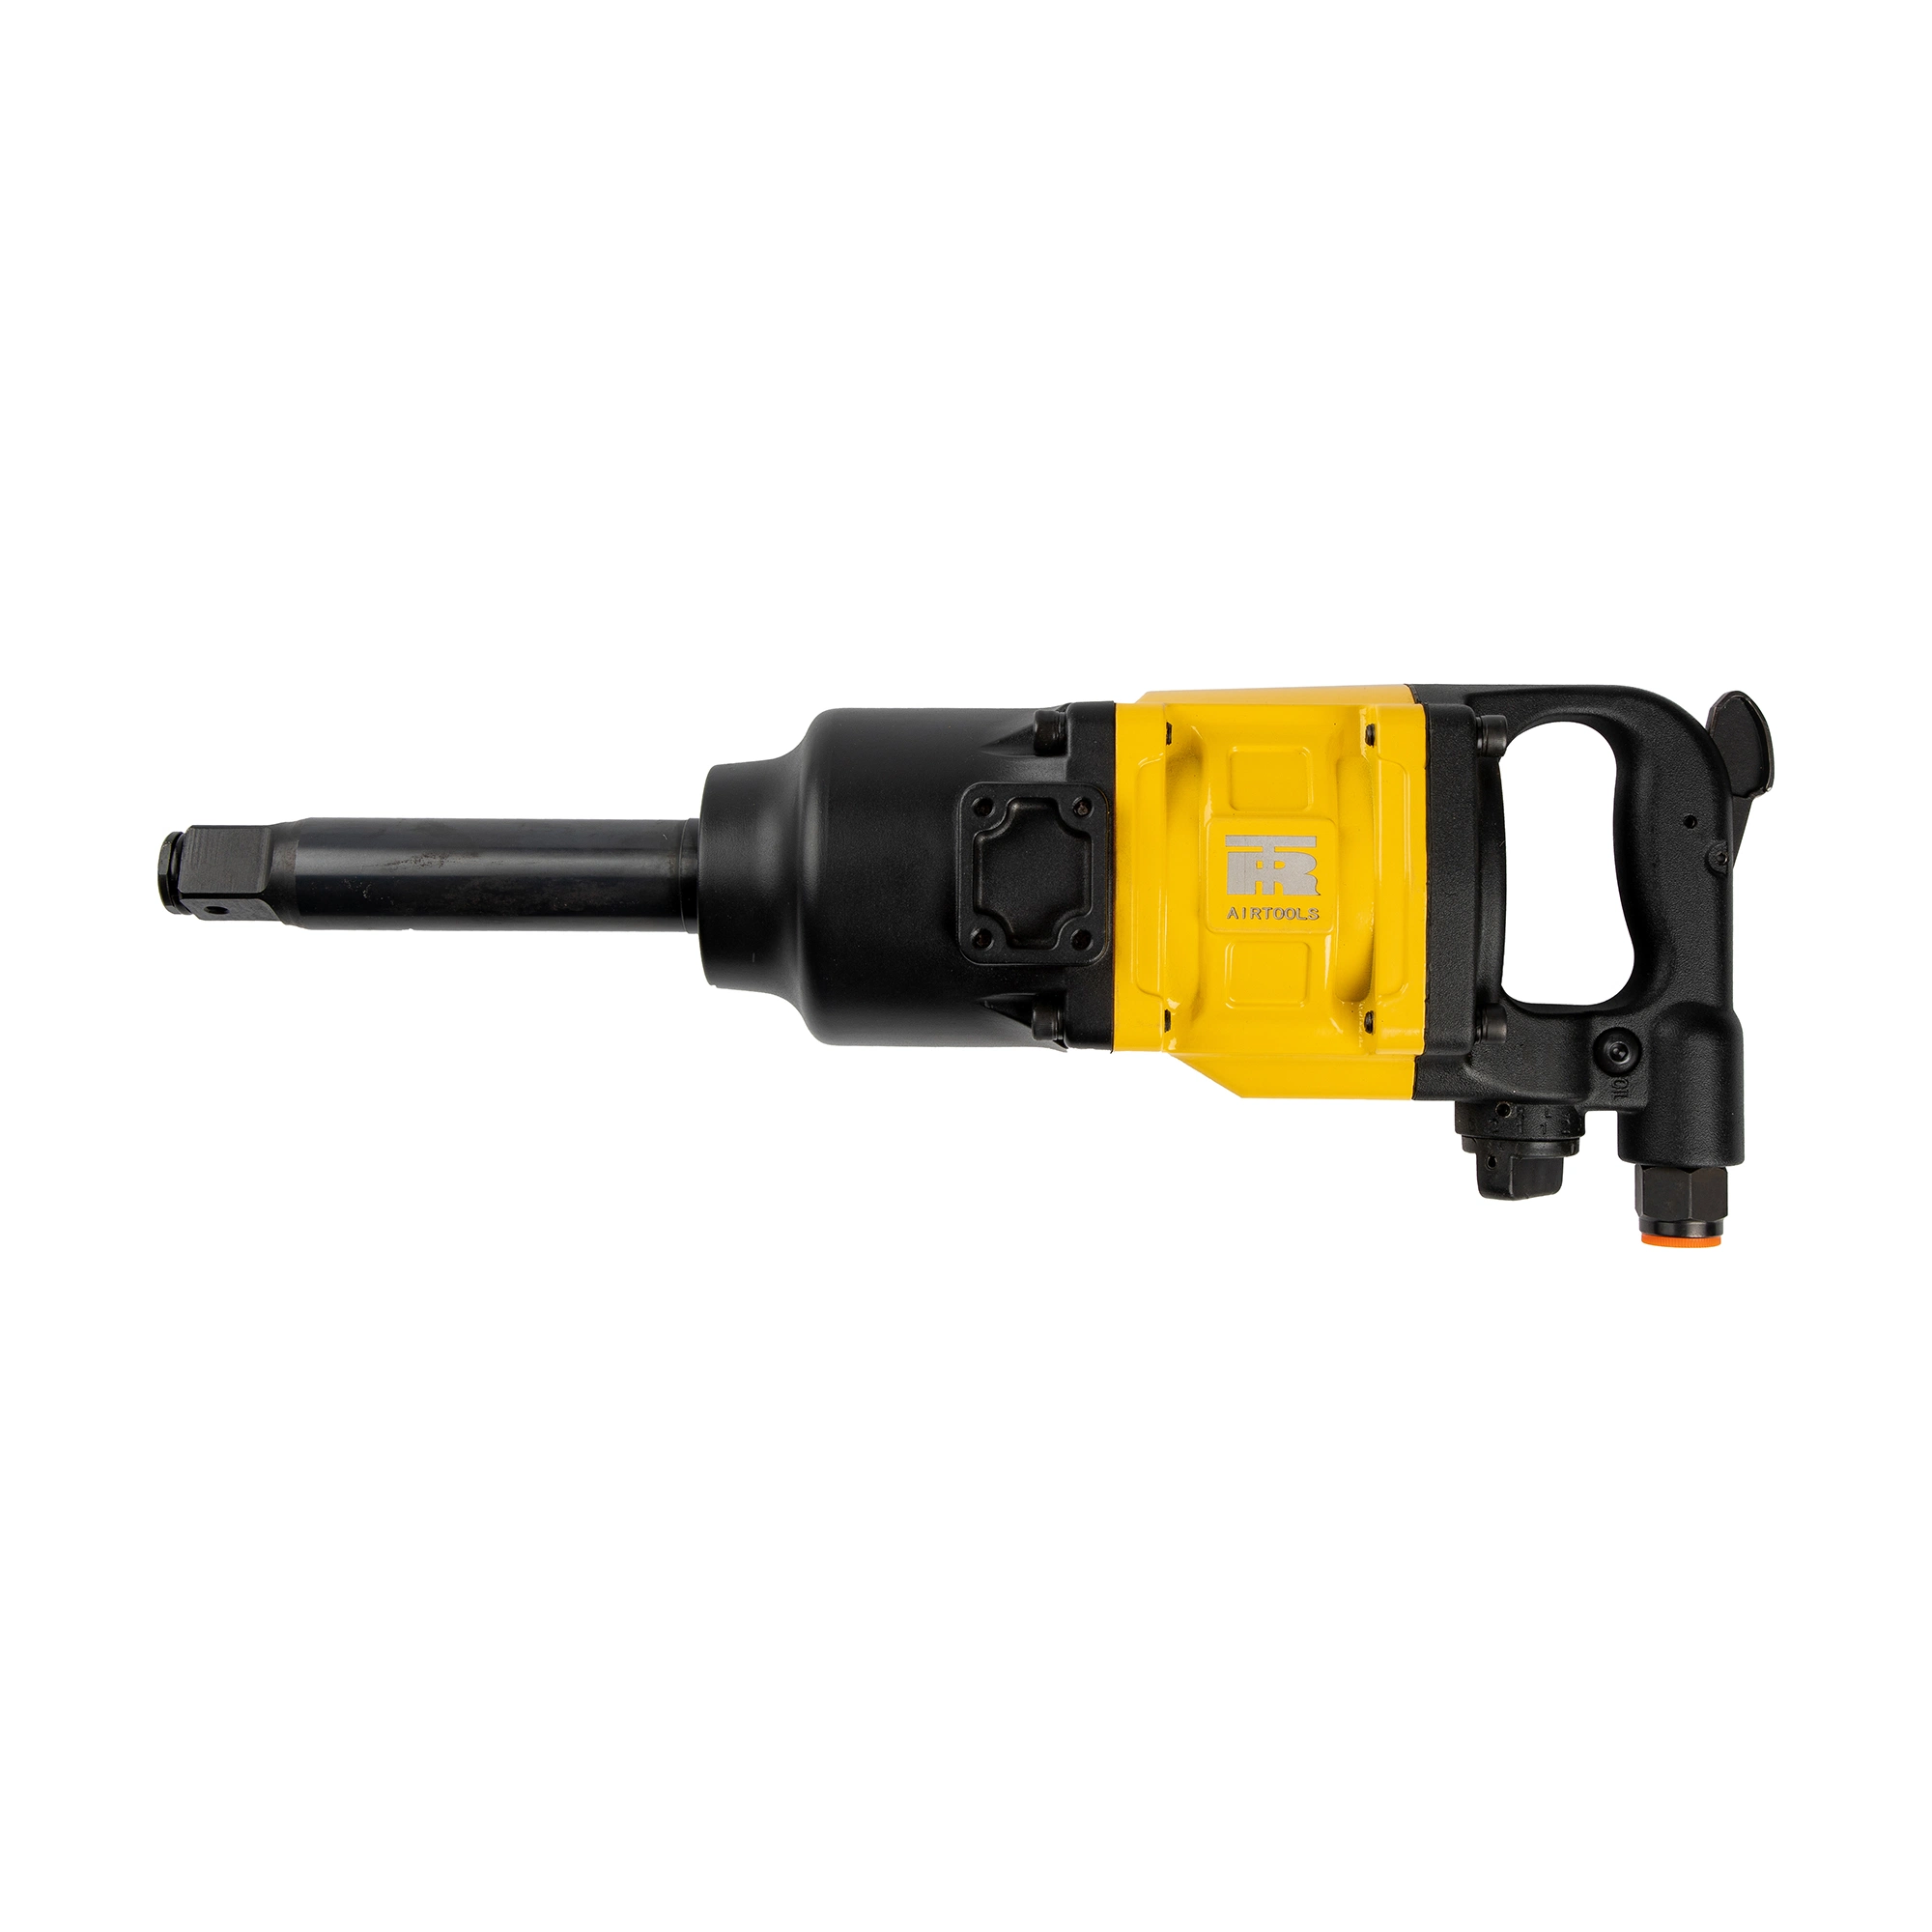 Small and Medium Truck Tools: 1-Inch Powerful and High-Torque Air Wrench